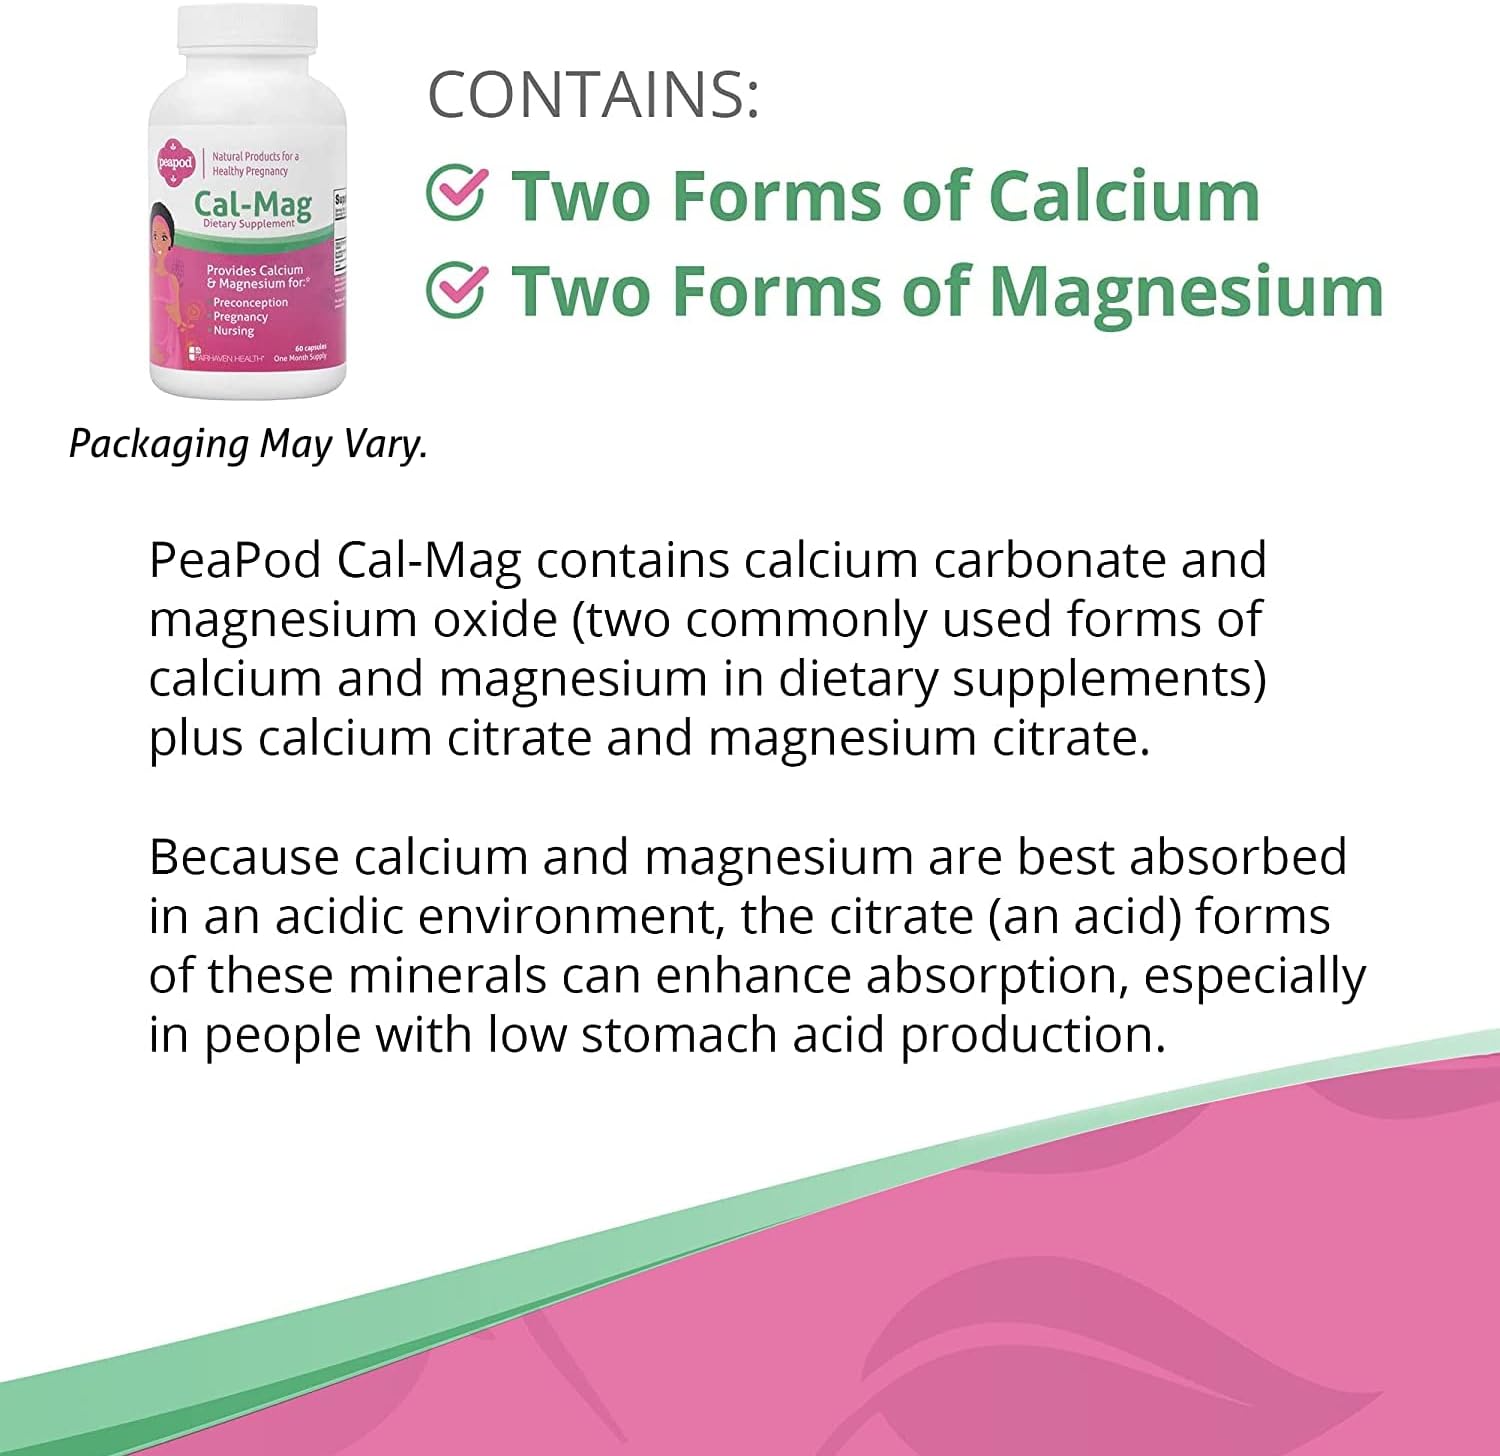 Fairhaven Health Peapod Cal-Mag | Pregnancy & Lactation Supplement | Contains Calcium, Magnesium, & Vitamin D3 for Pregnancy, Baby and Female Health | Gluten & Dairy Free | 1 Month Supply : Health & Household